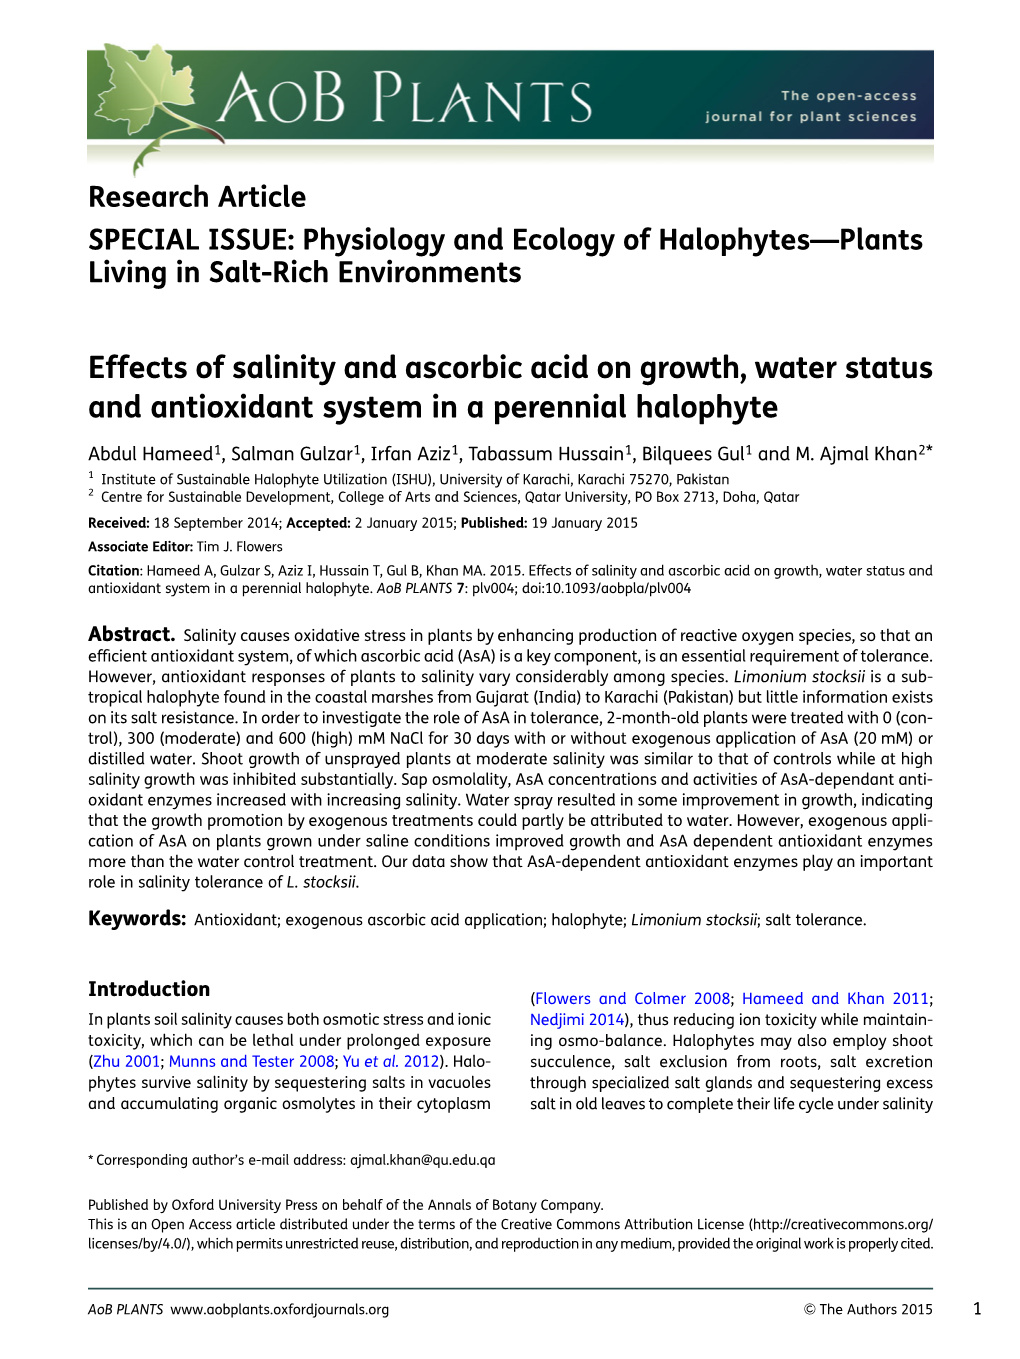 Effects of Salinity and Ascorbic Acid on Growth, Water Status and Antioxidant System in a Perennial Halophyte